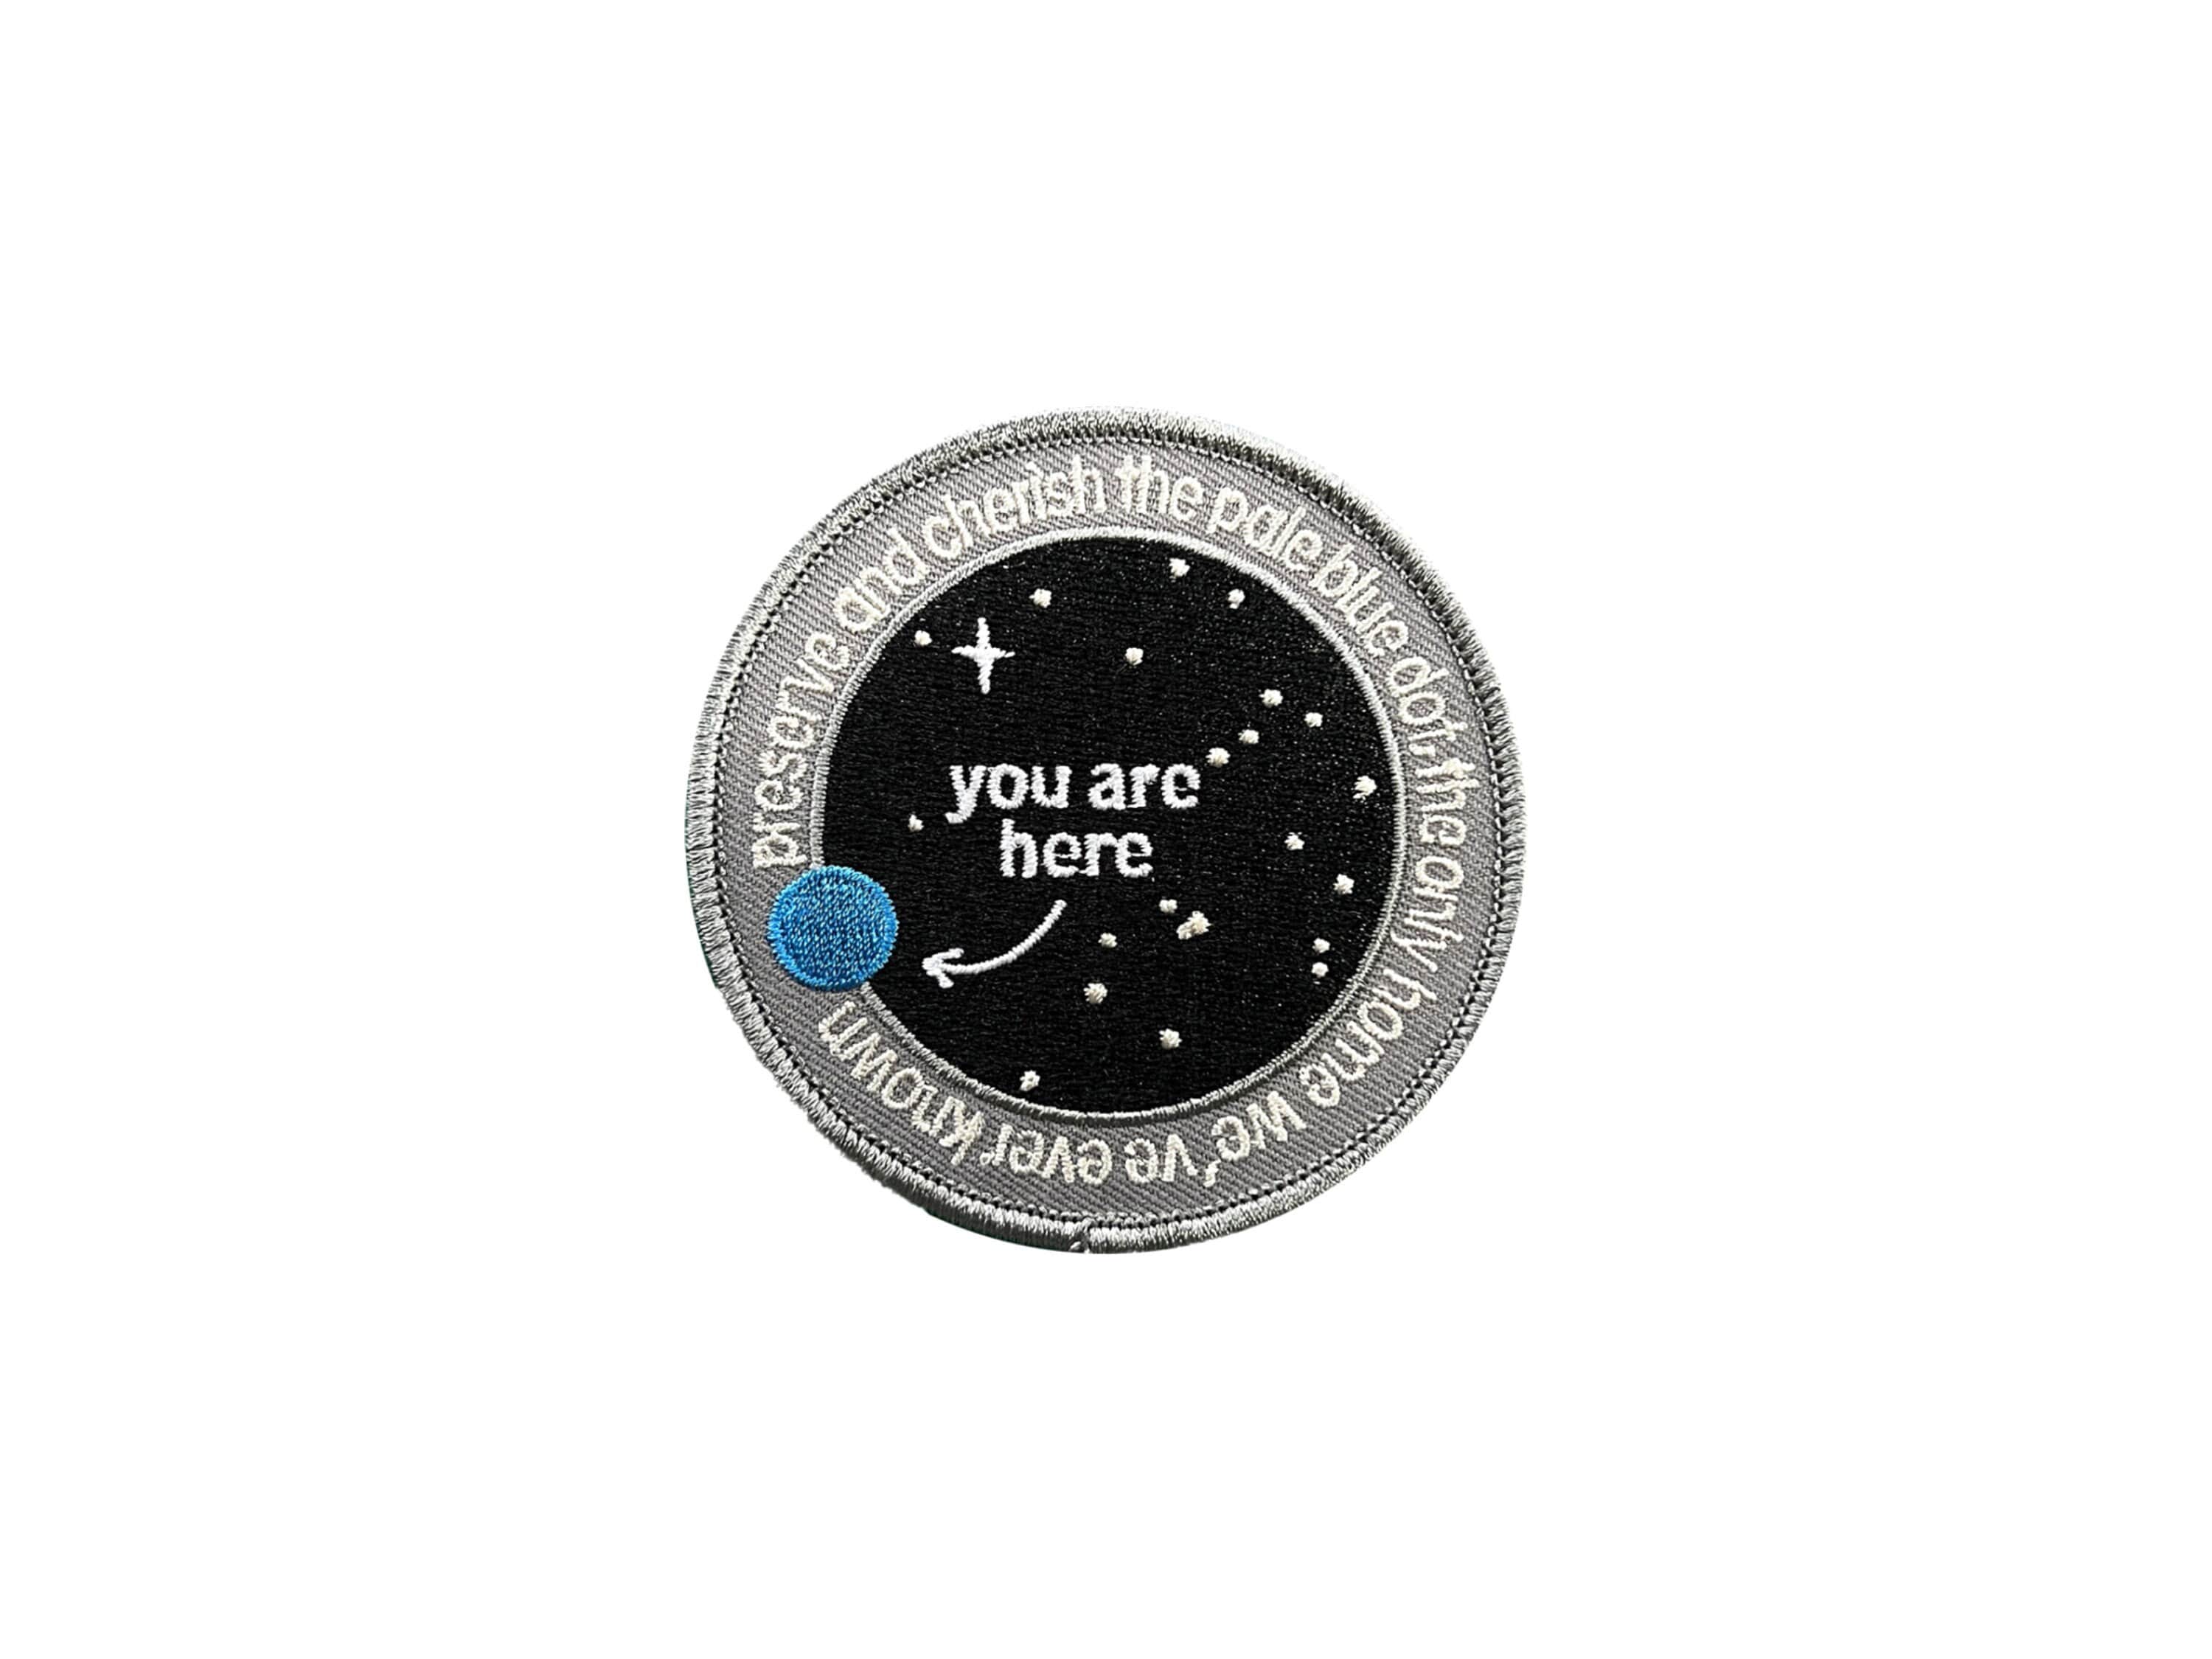 Pale Blue Dot Patch - - Cosmos Expedition Patch - Space Mission Jacket Patch